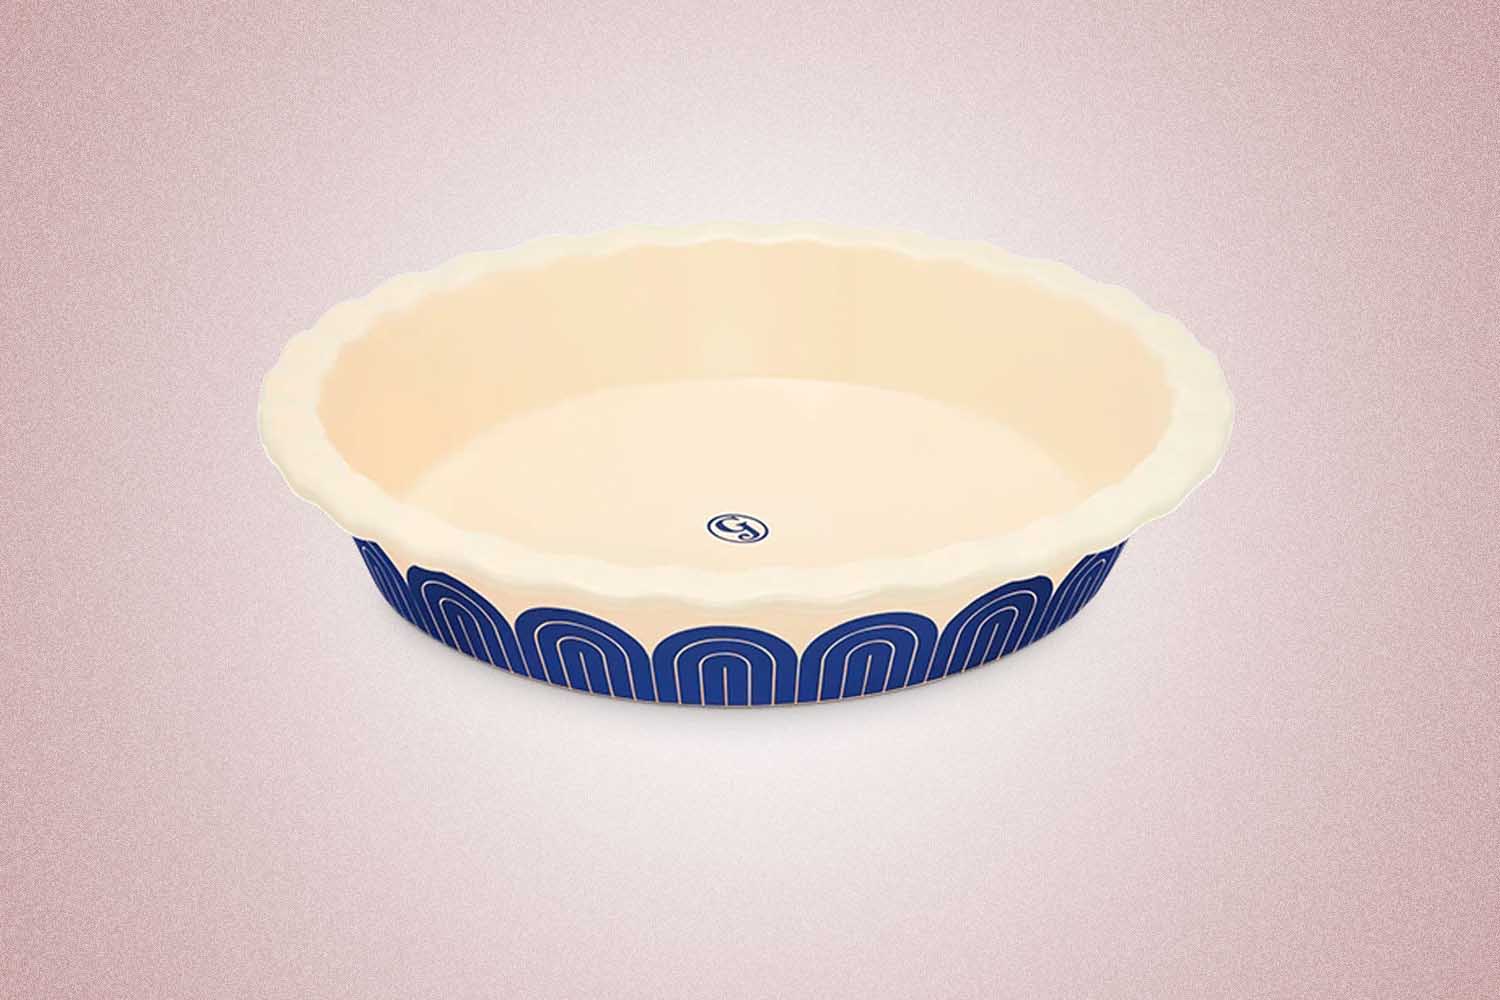 A blue and white pie dish from Great Jones, a perfect Valentine’s Day gift for 2022, on a pink background.